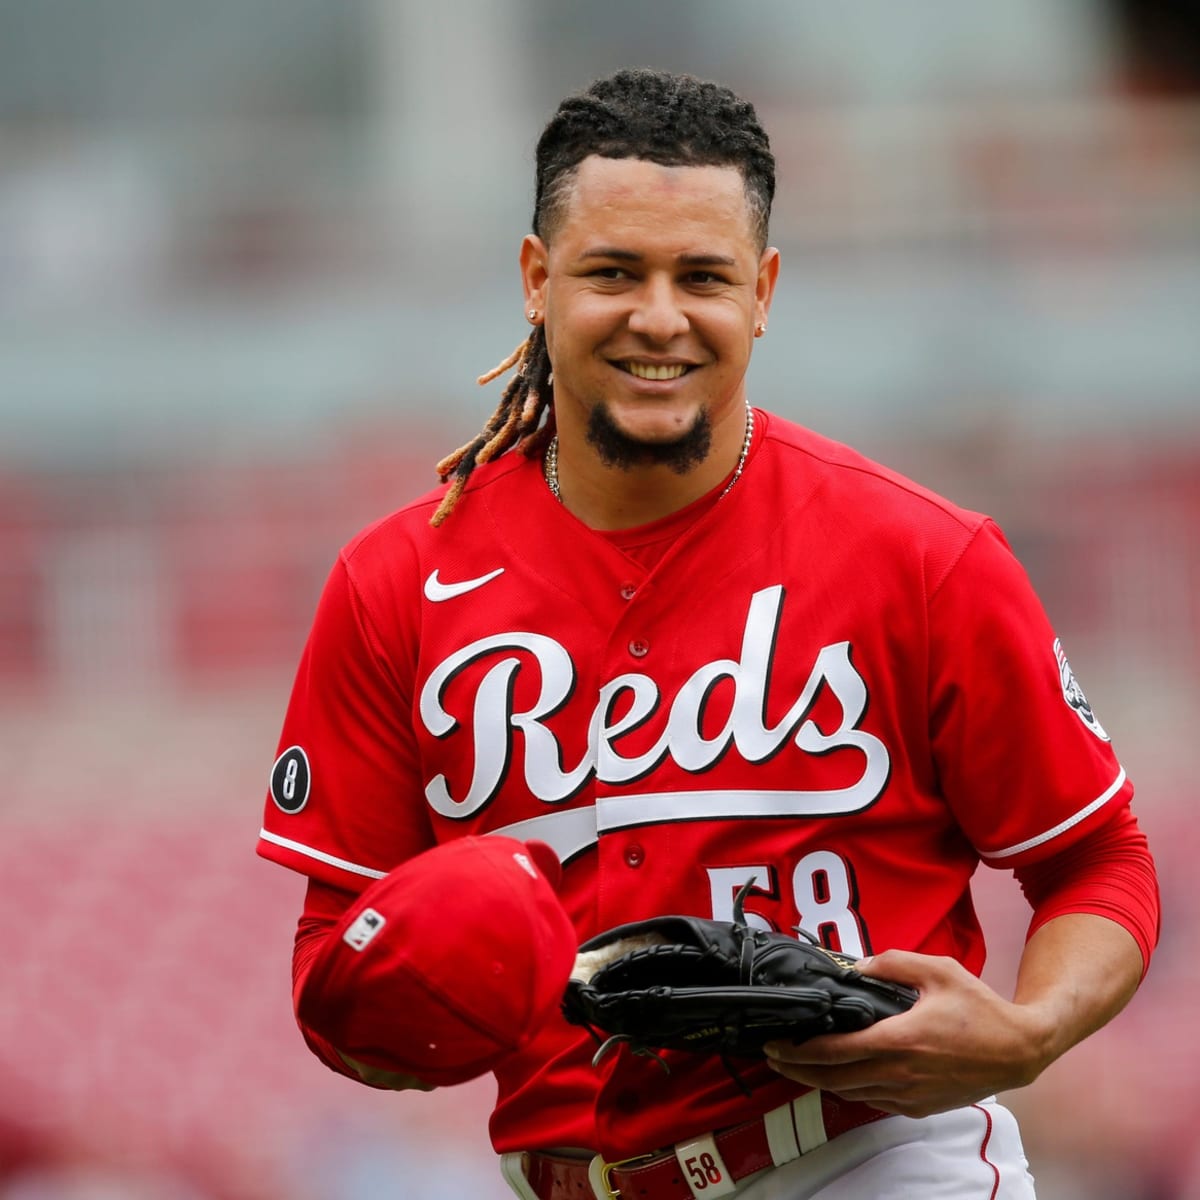 Reds teammate thinks Yankees' hair policy could hurt Luis Castillo trade